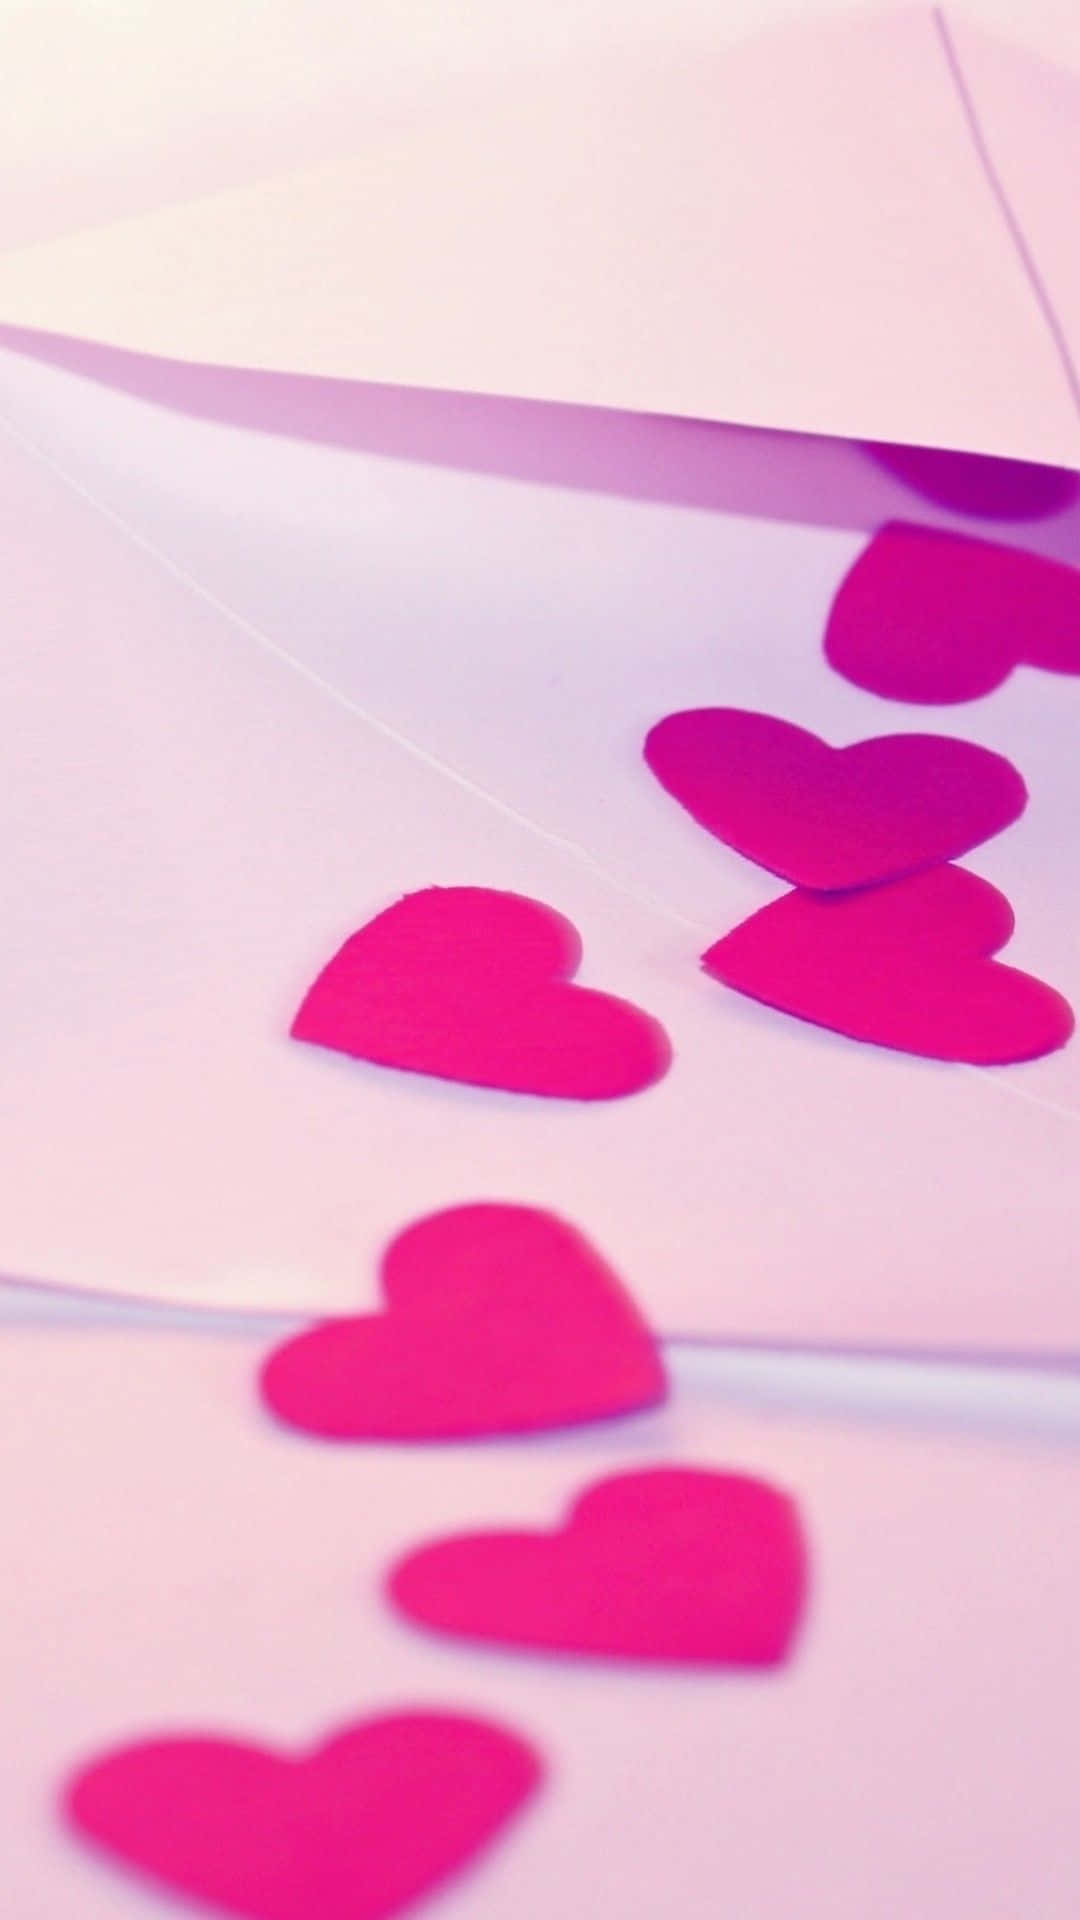 Pink Paper Hearts Girly Tumblr Background